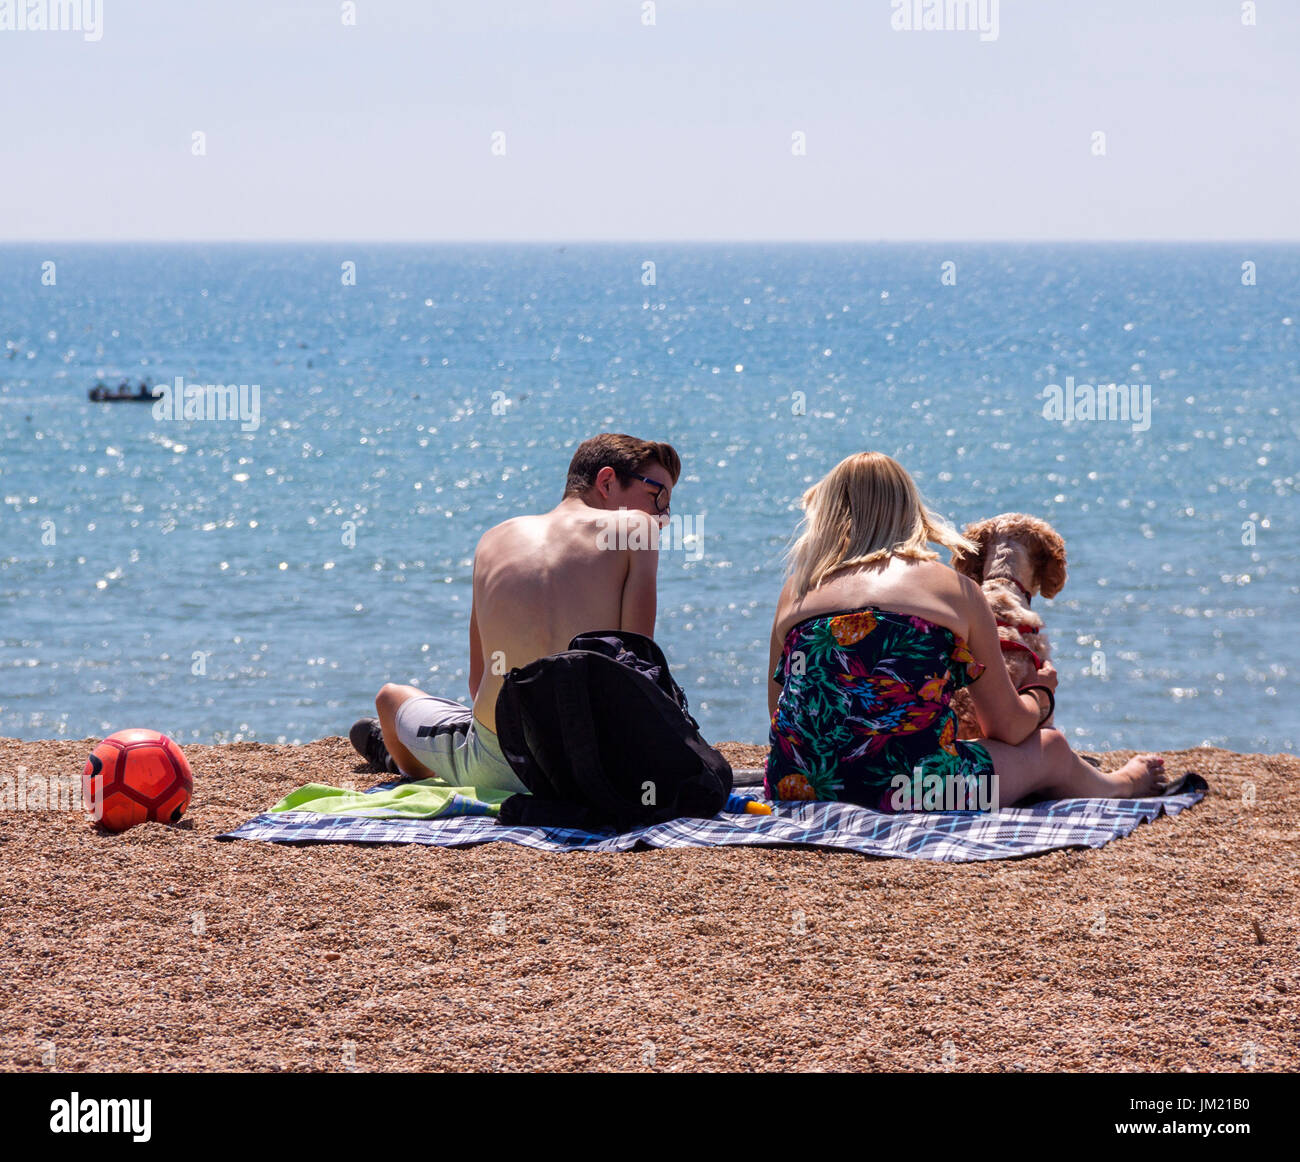 West Bay, Dorset, 25th July 17 Visitors enjoy glorious sunshine on the beach at West Bay, Dorset, where the series 'Broadchurch' was filmed. Credit: South West Photos/Alamy Live News Stock Photo